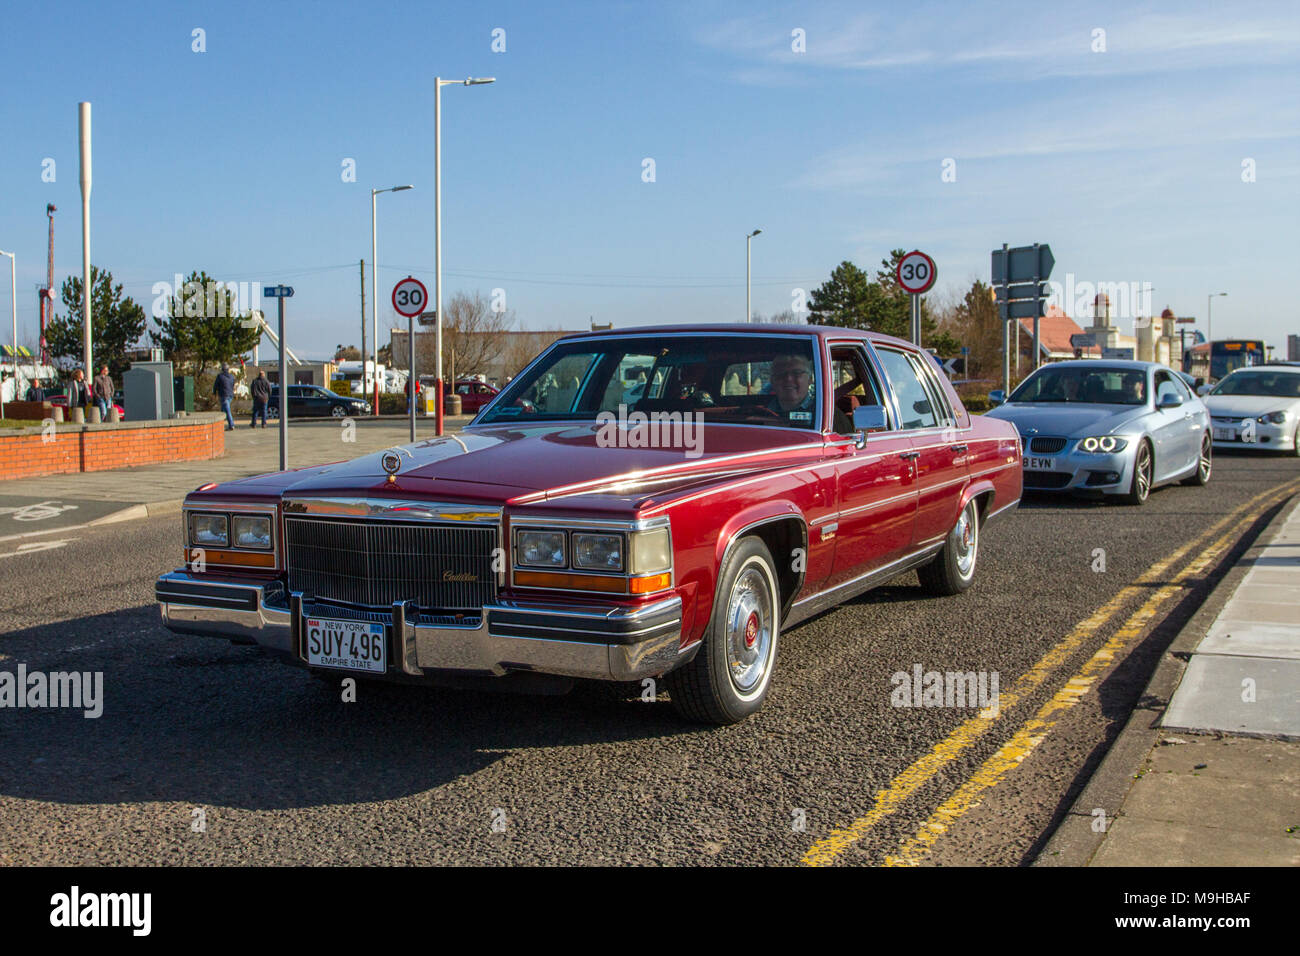 1993 90s  American signature series Cadillac 4100cc saloon at the North-West Supercar event as cars and tourists arrive in the coastal resort of Southport. SuperCars are bumper to bumper on the seafront esplanade as classic & 90s USA car enthusiasts enjoy a motoring day out. Stock Photo